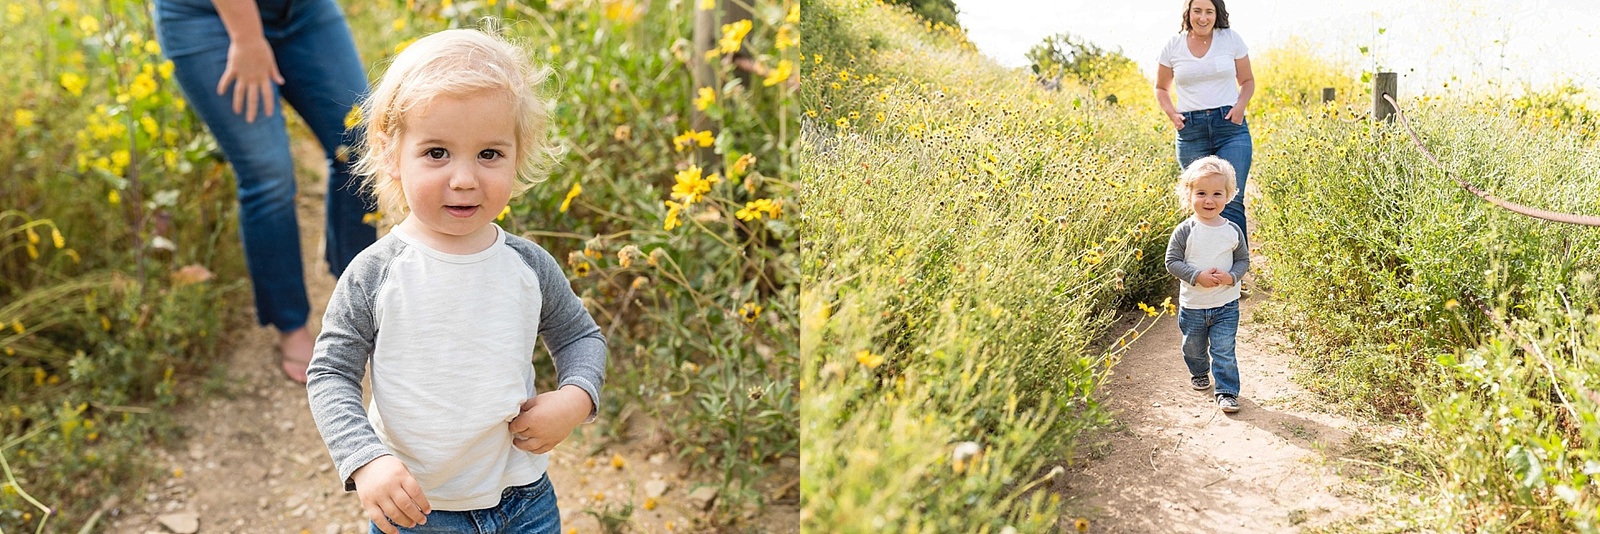 mom and toddler play in wildflowers in Palos Verdes